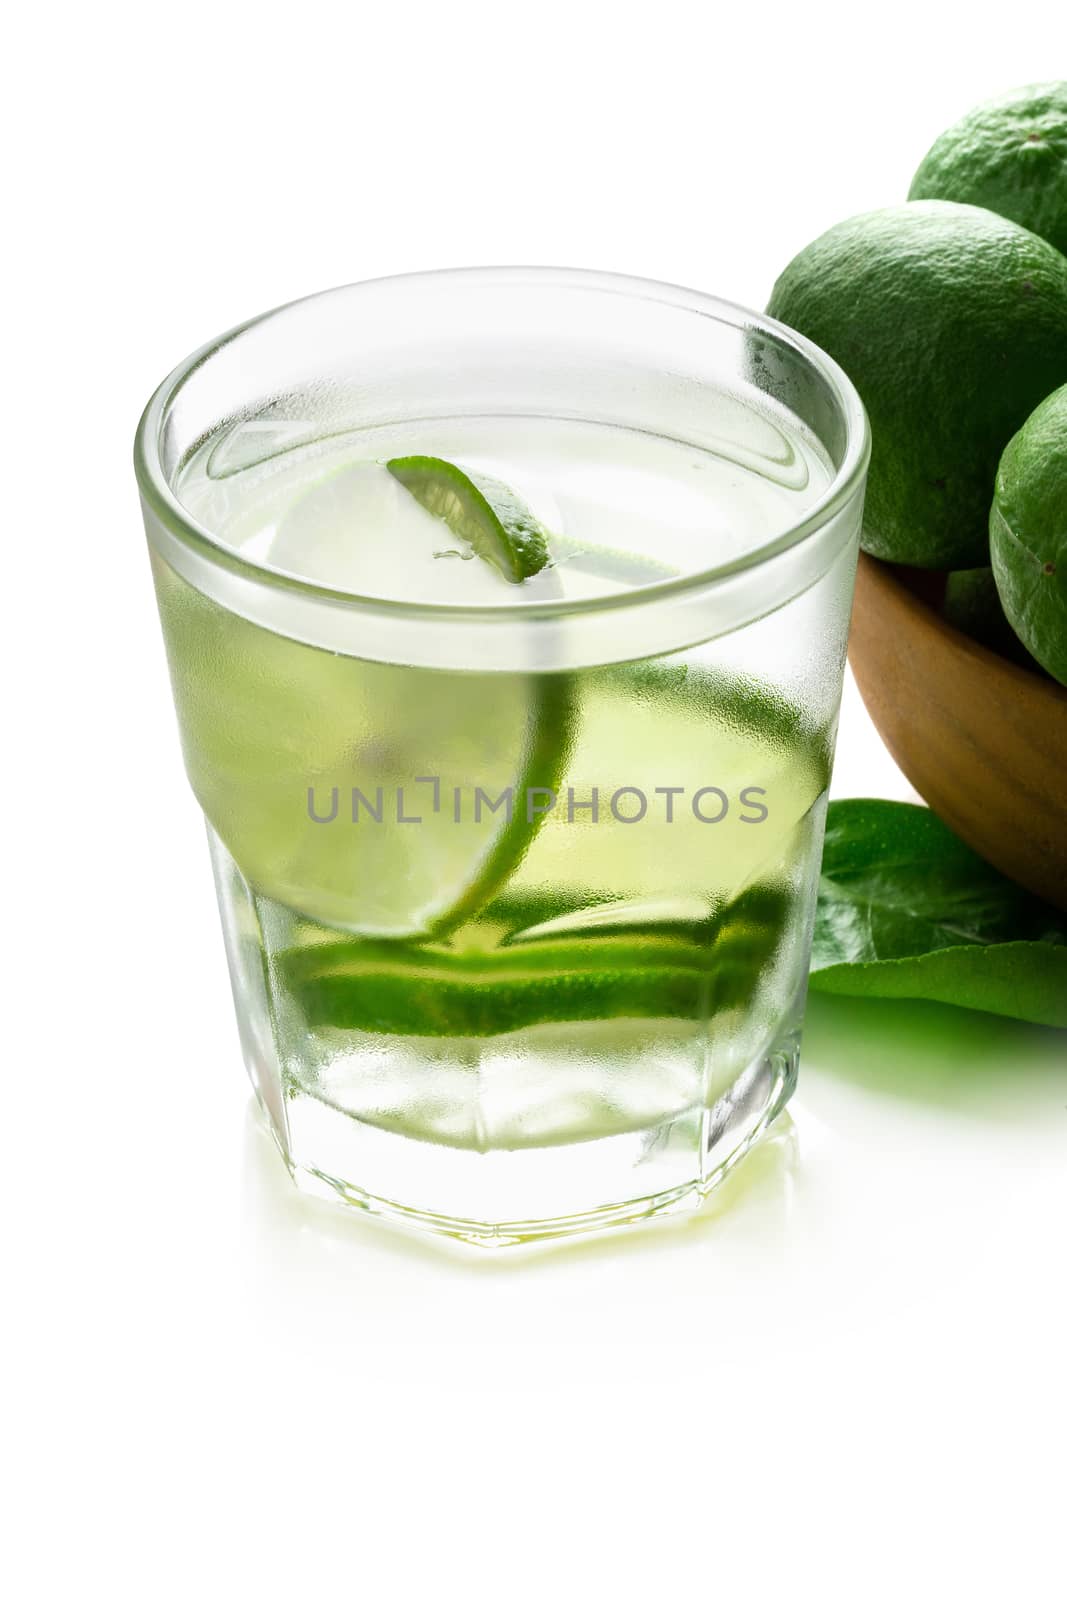 Lemon drink whit lime slices isolated on a white background